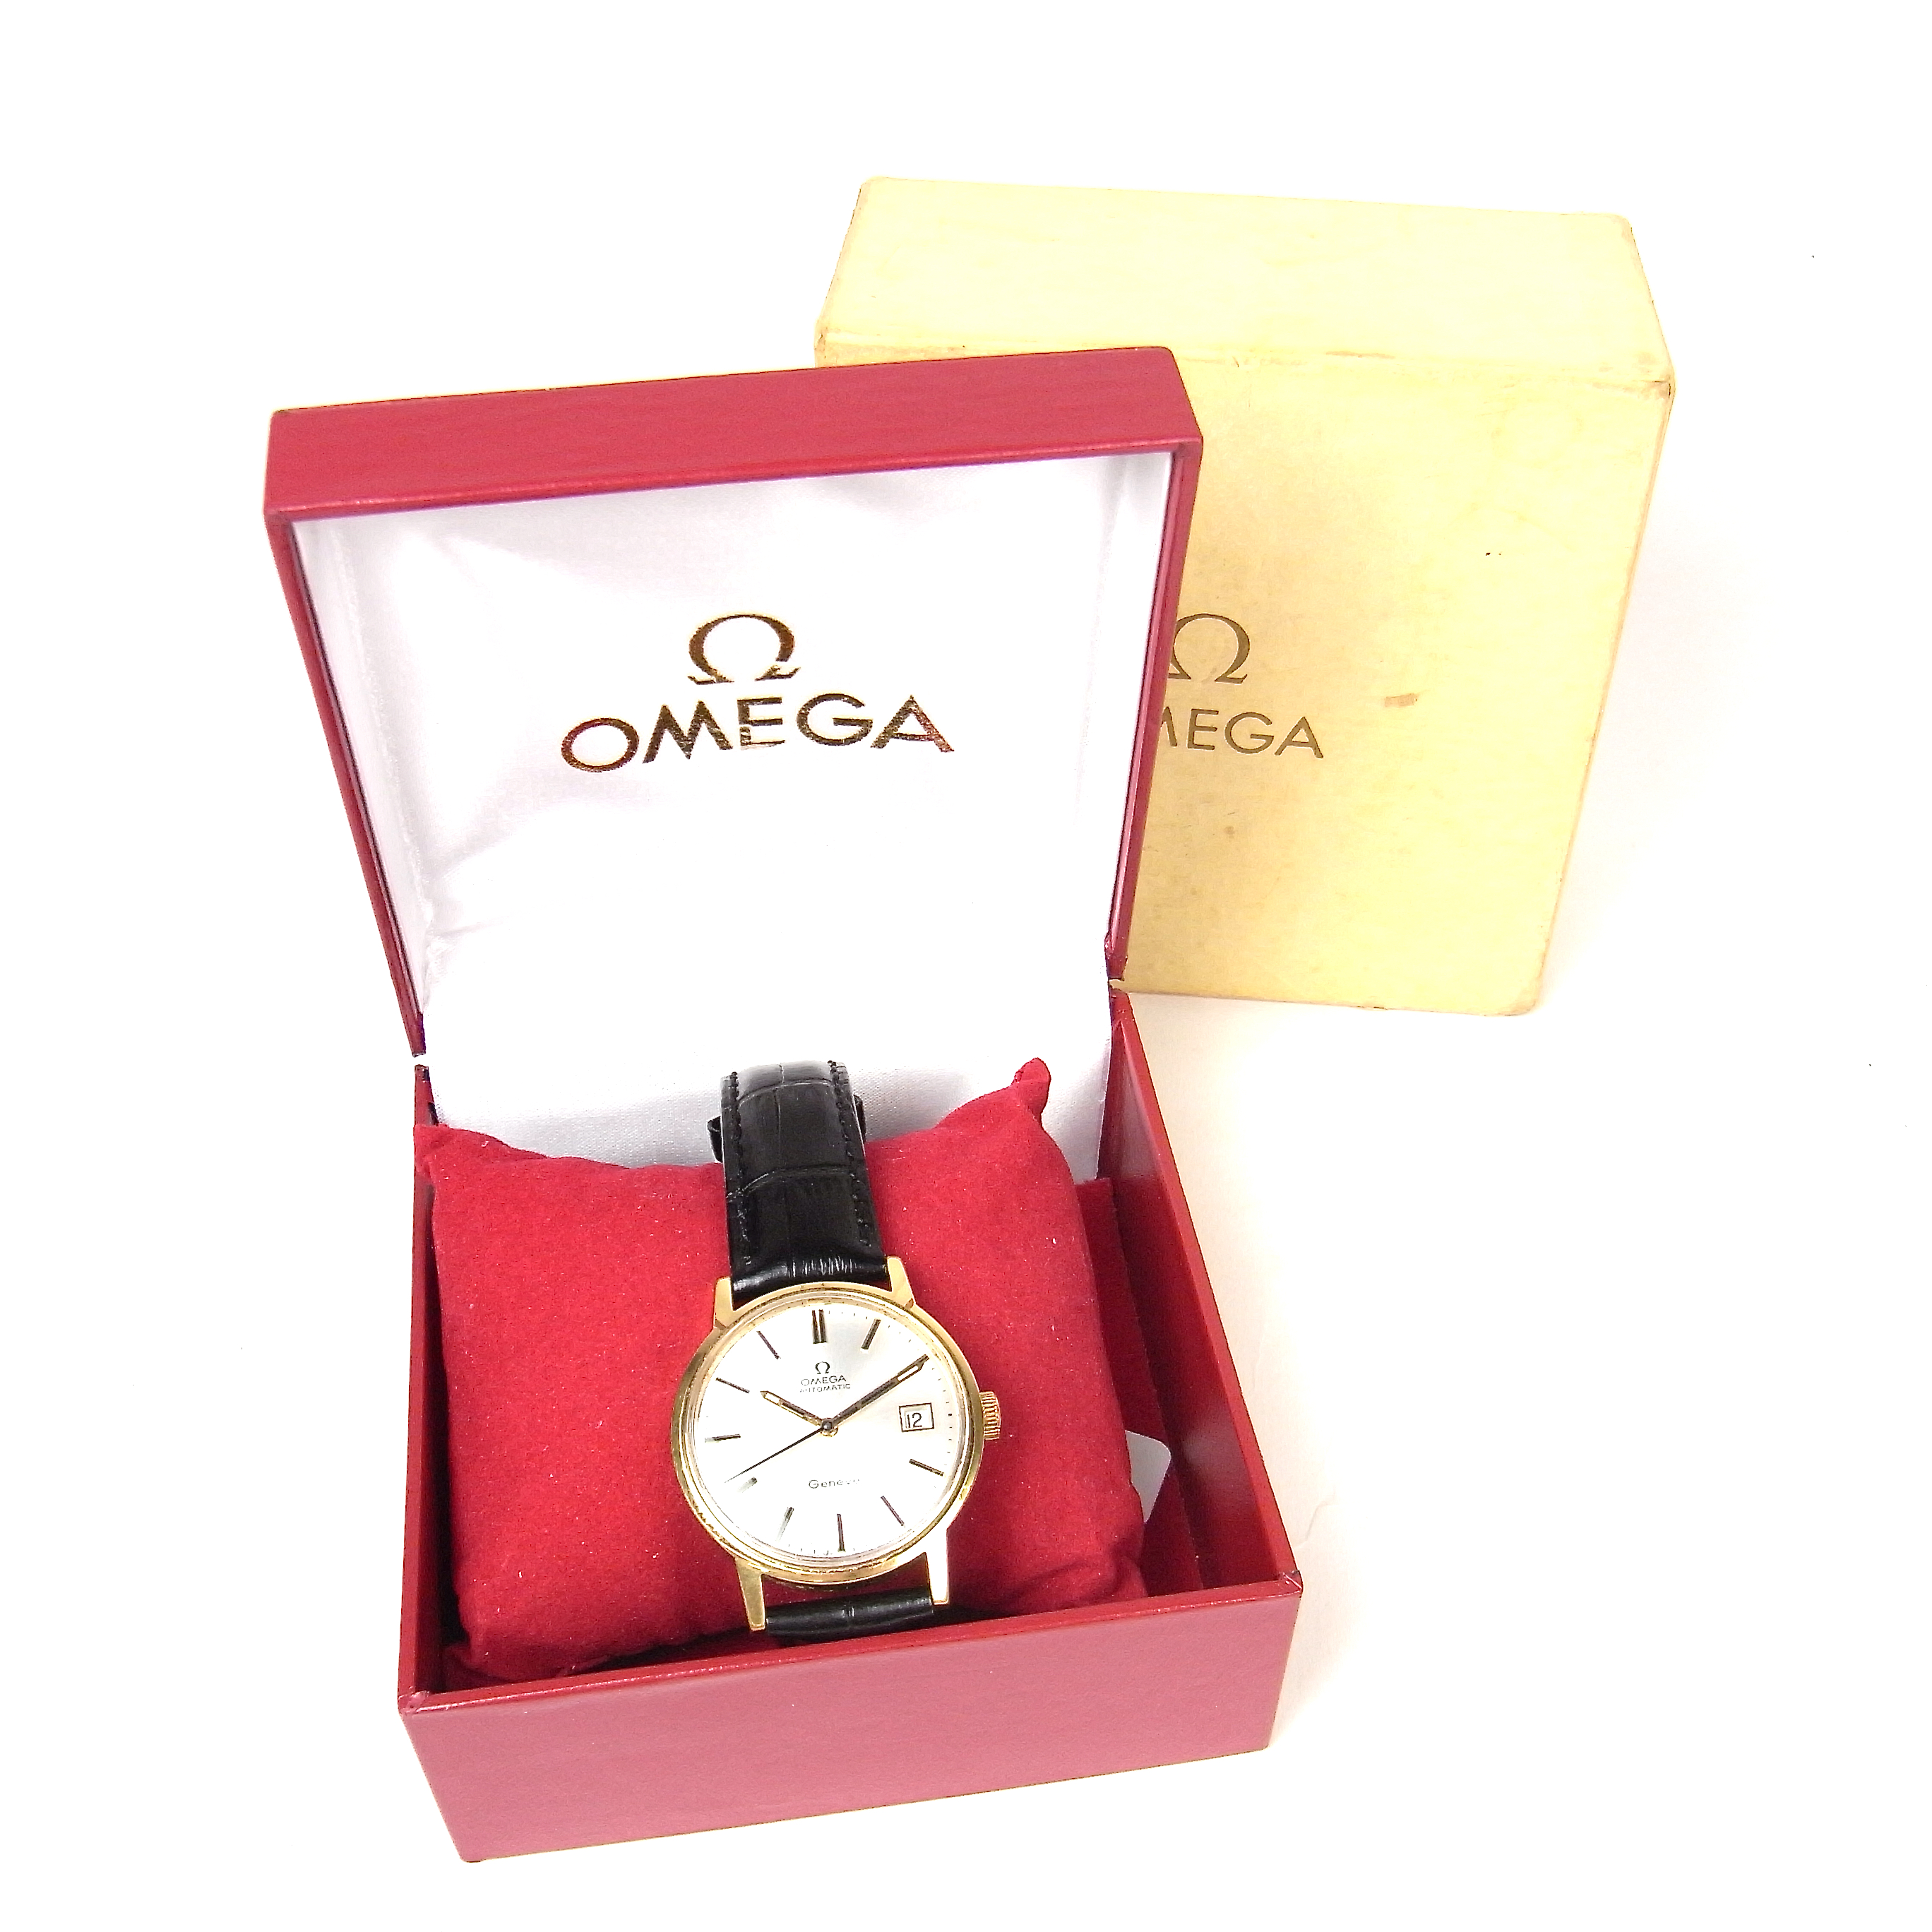 Omega Genève gold plated automatic watch. - Image 2 of 2